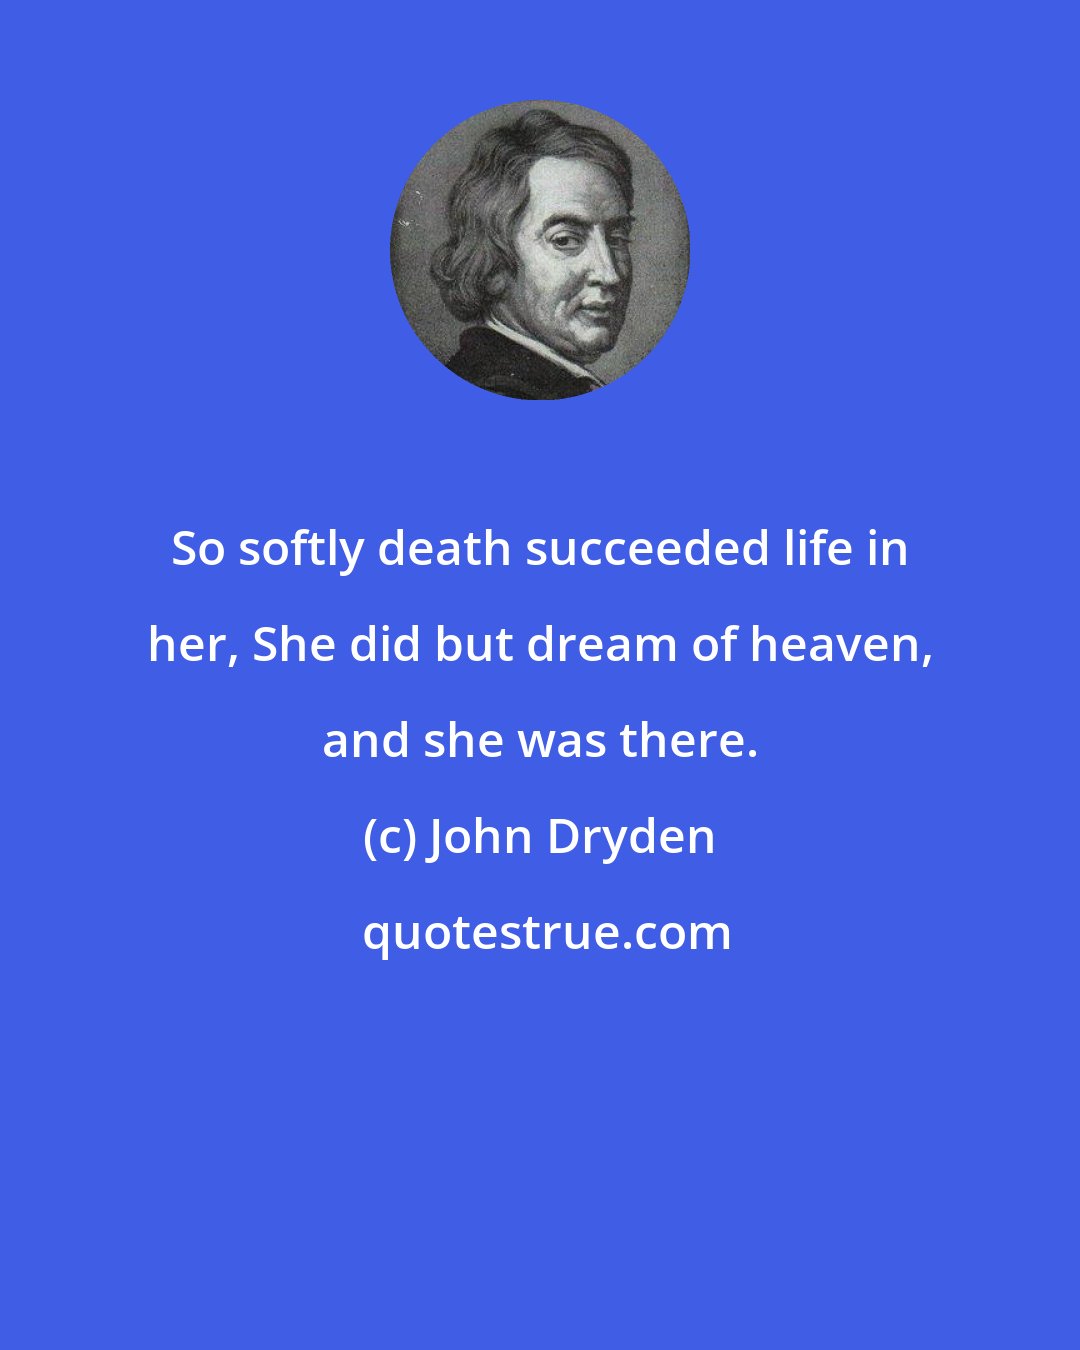 John Dryden: So softly death succeeded life in her, She did but dream of heaven, and she was there.